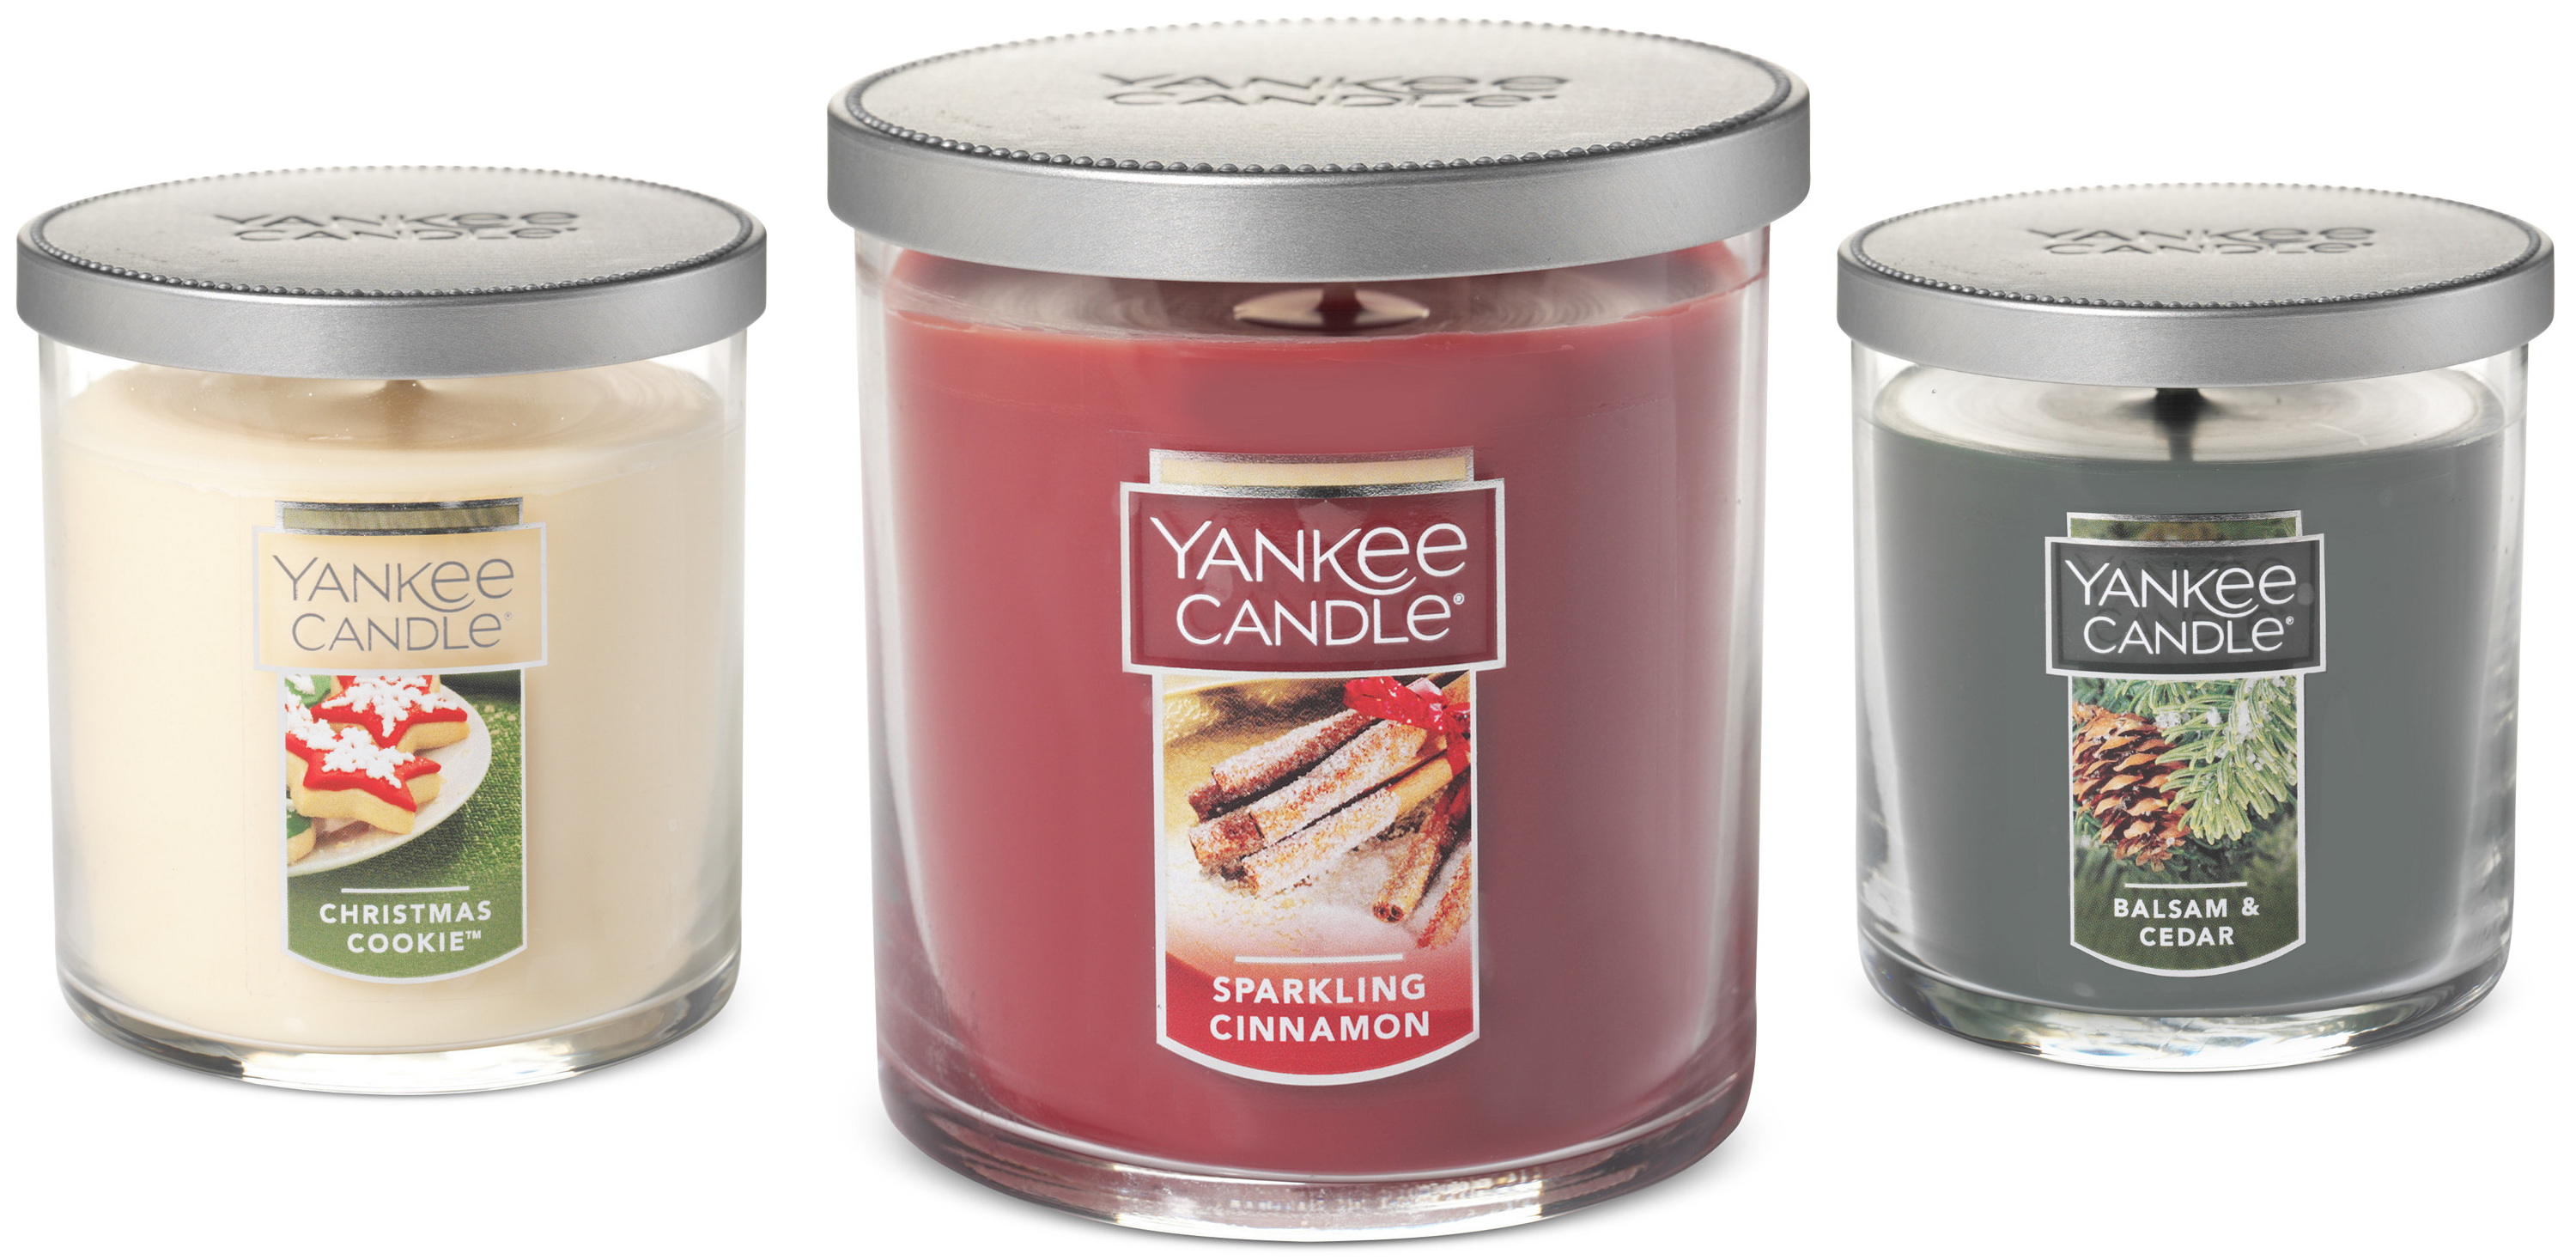 Yankee Candle Holiday Tumbler Only $9.99! Three Scents + FREE Shipping on $25!